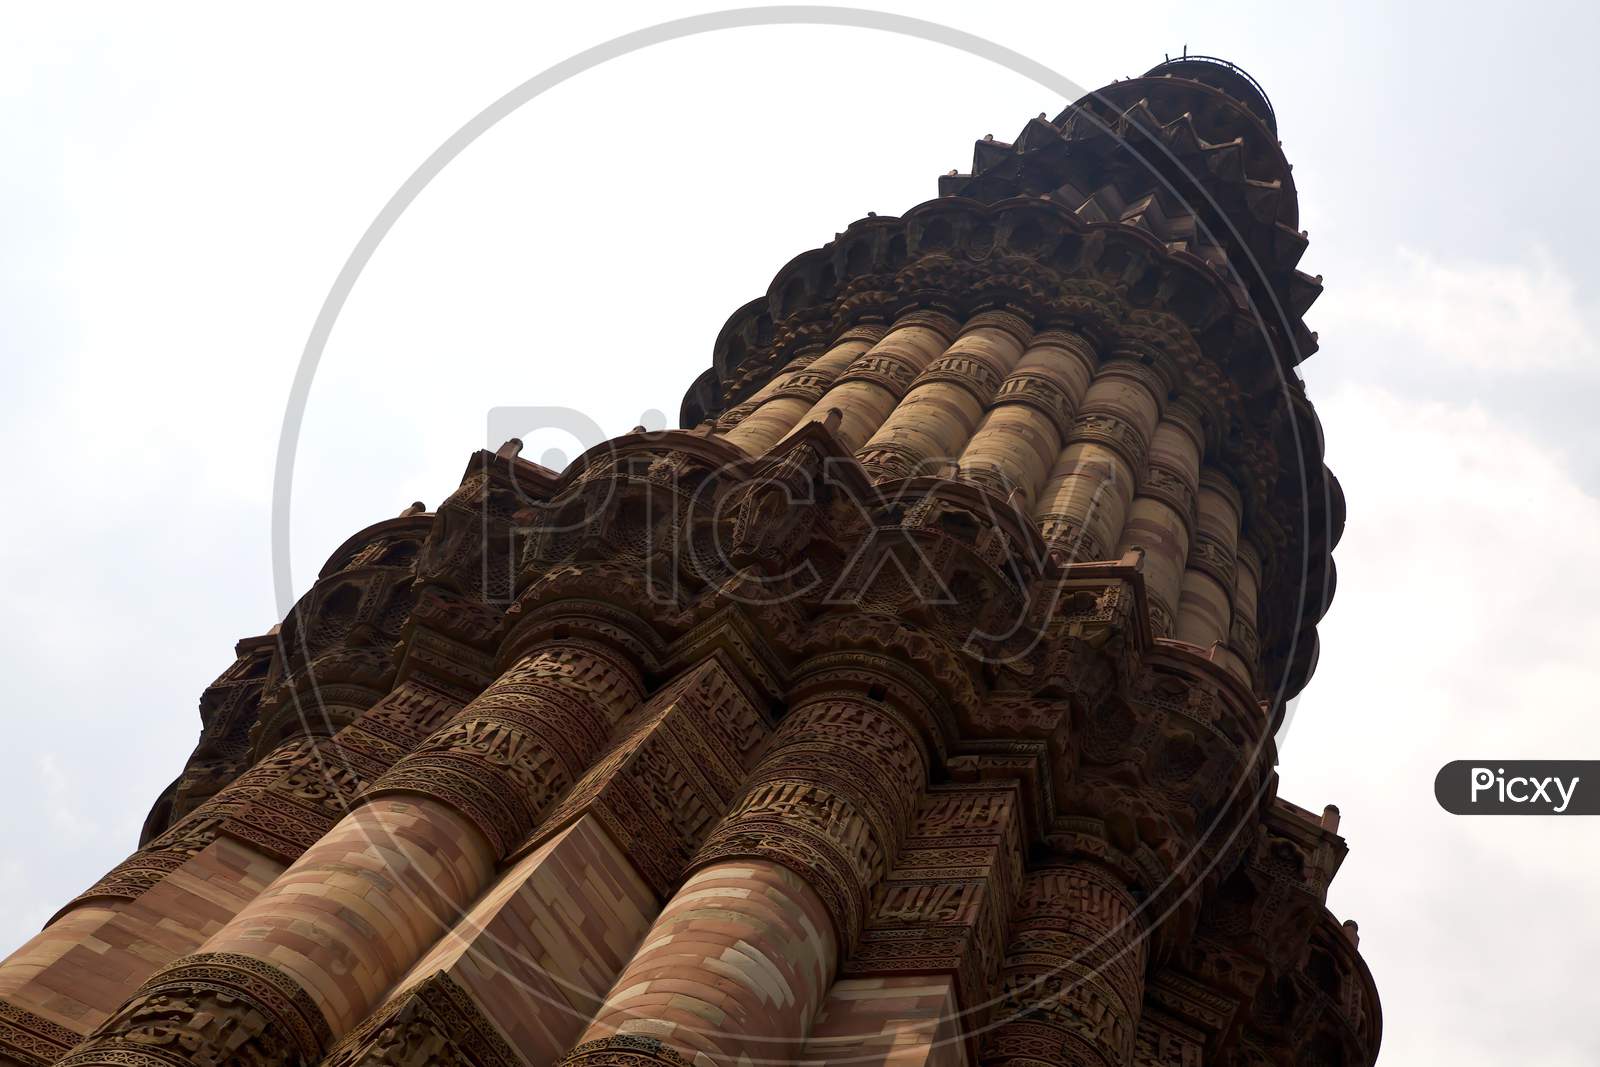 The Qutub Minar Is A 73-Metre Tall Tapering Tower Of Five Storeys In India. Looking Up At The Qutub Minar Can Make You Feel A Bit Dizzy.